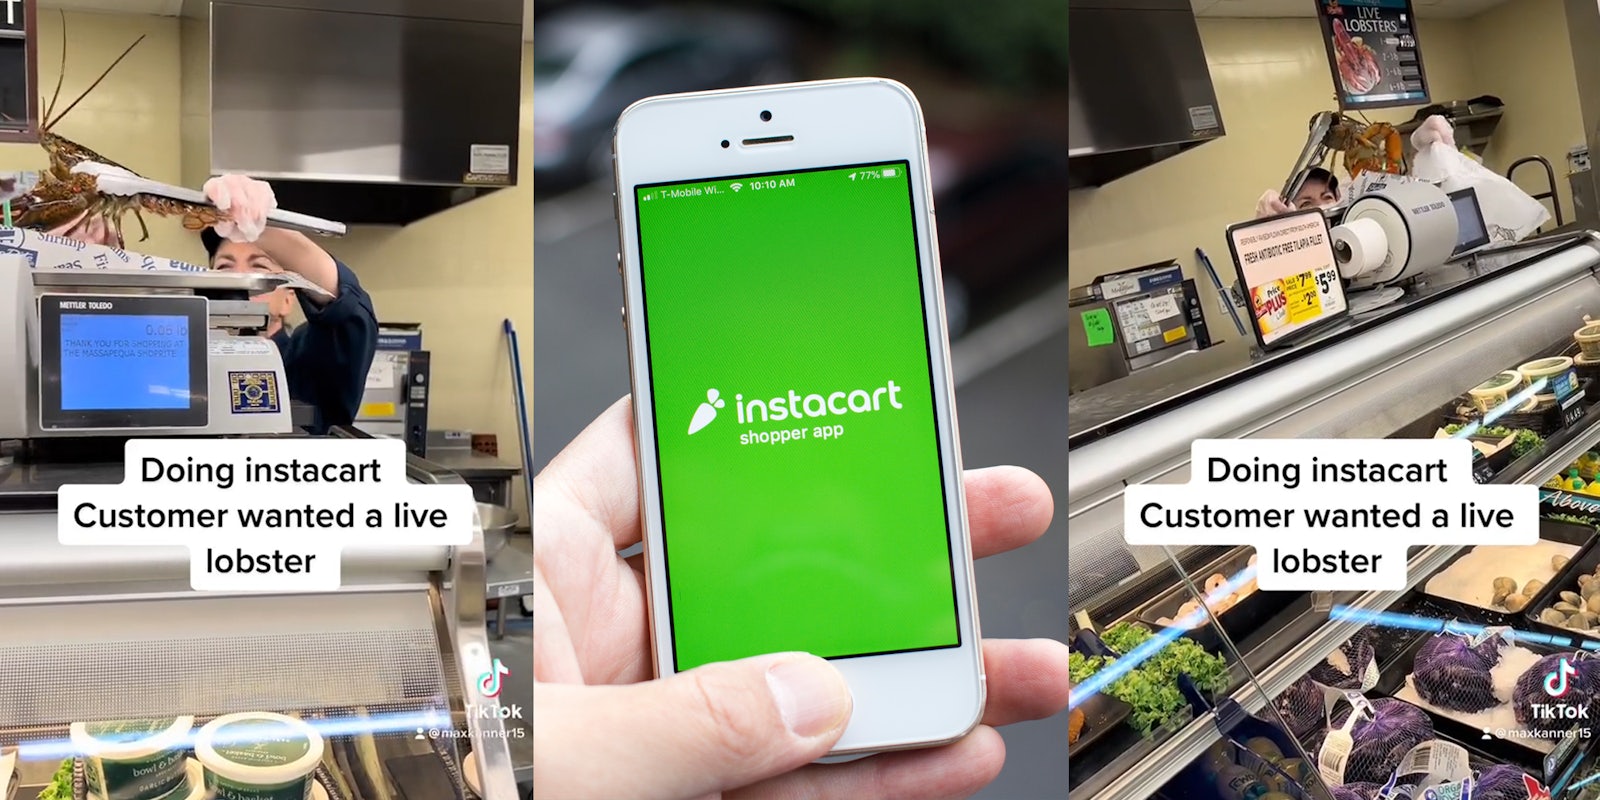 worker placing lobster on scale with caption 'Doing instacart Customer wanted a live lobster' (l) hand holding phone with Instacart Shopper App on screen (c) worker placing lobster in grocery bag with caption 'Doing instacart Customer wanted a live lobster' (r)